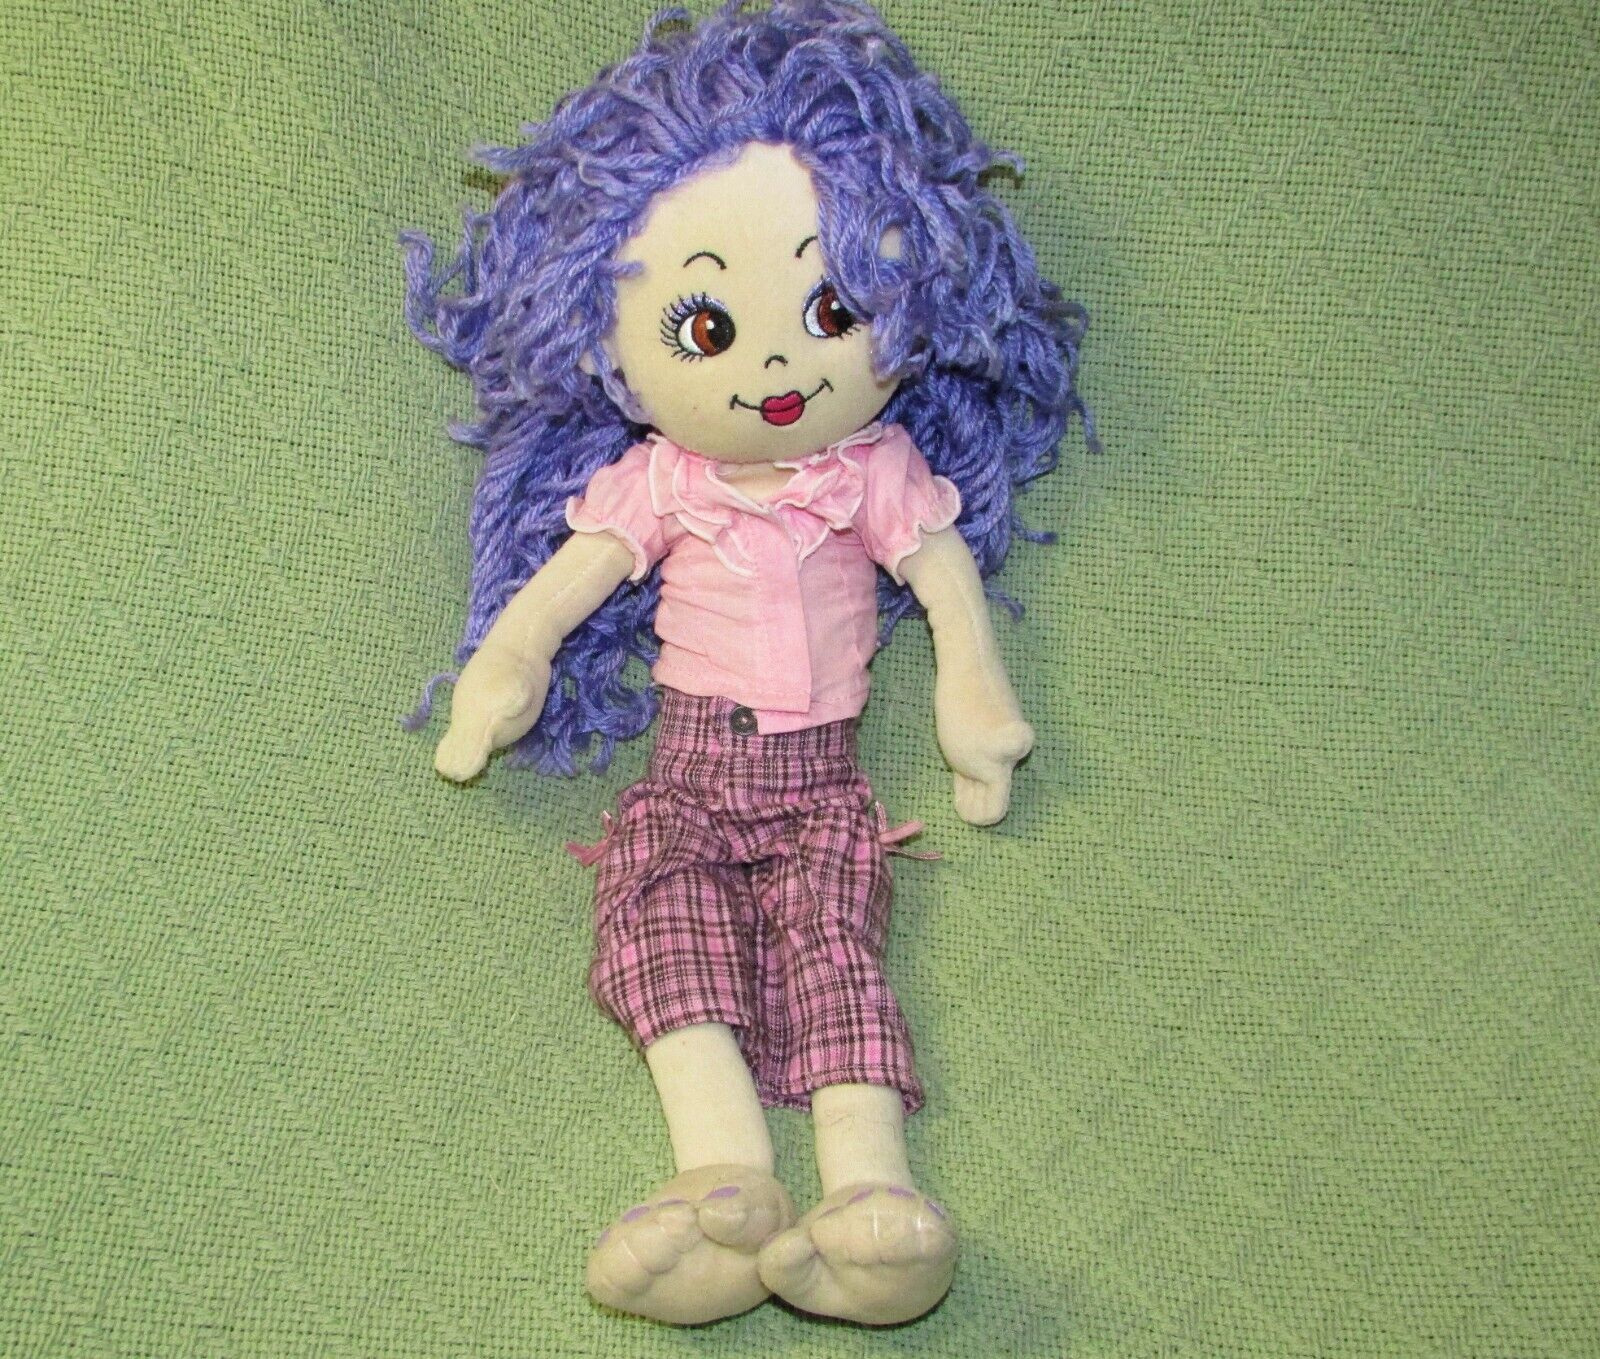 Primary image for BUILD A BEAR 2B DOLL PLUSH STUFFED CHARACTER WITH 3 PIECE OUTFIT PURPLE HAIR TOY